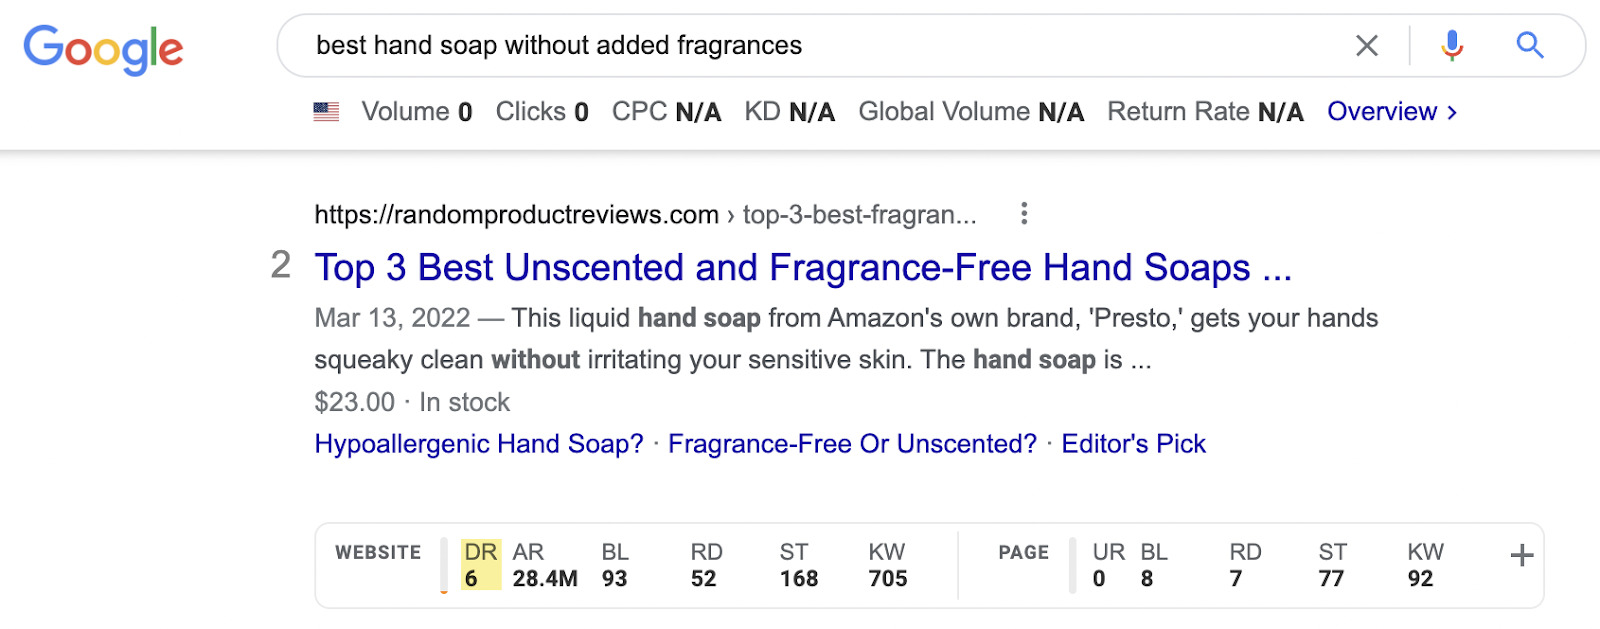 Google SERP for "best hand soap without fragrances"; SEO Toolbar showing a result with DR of 6